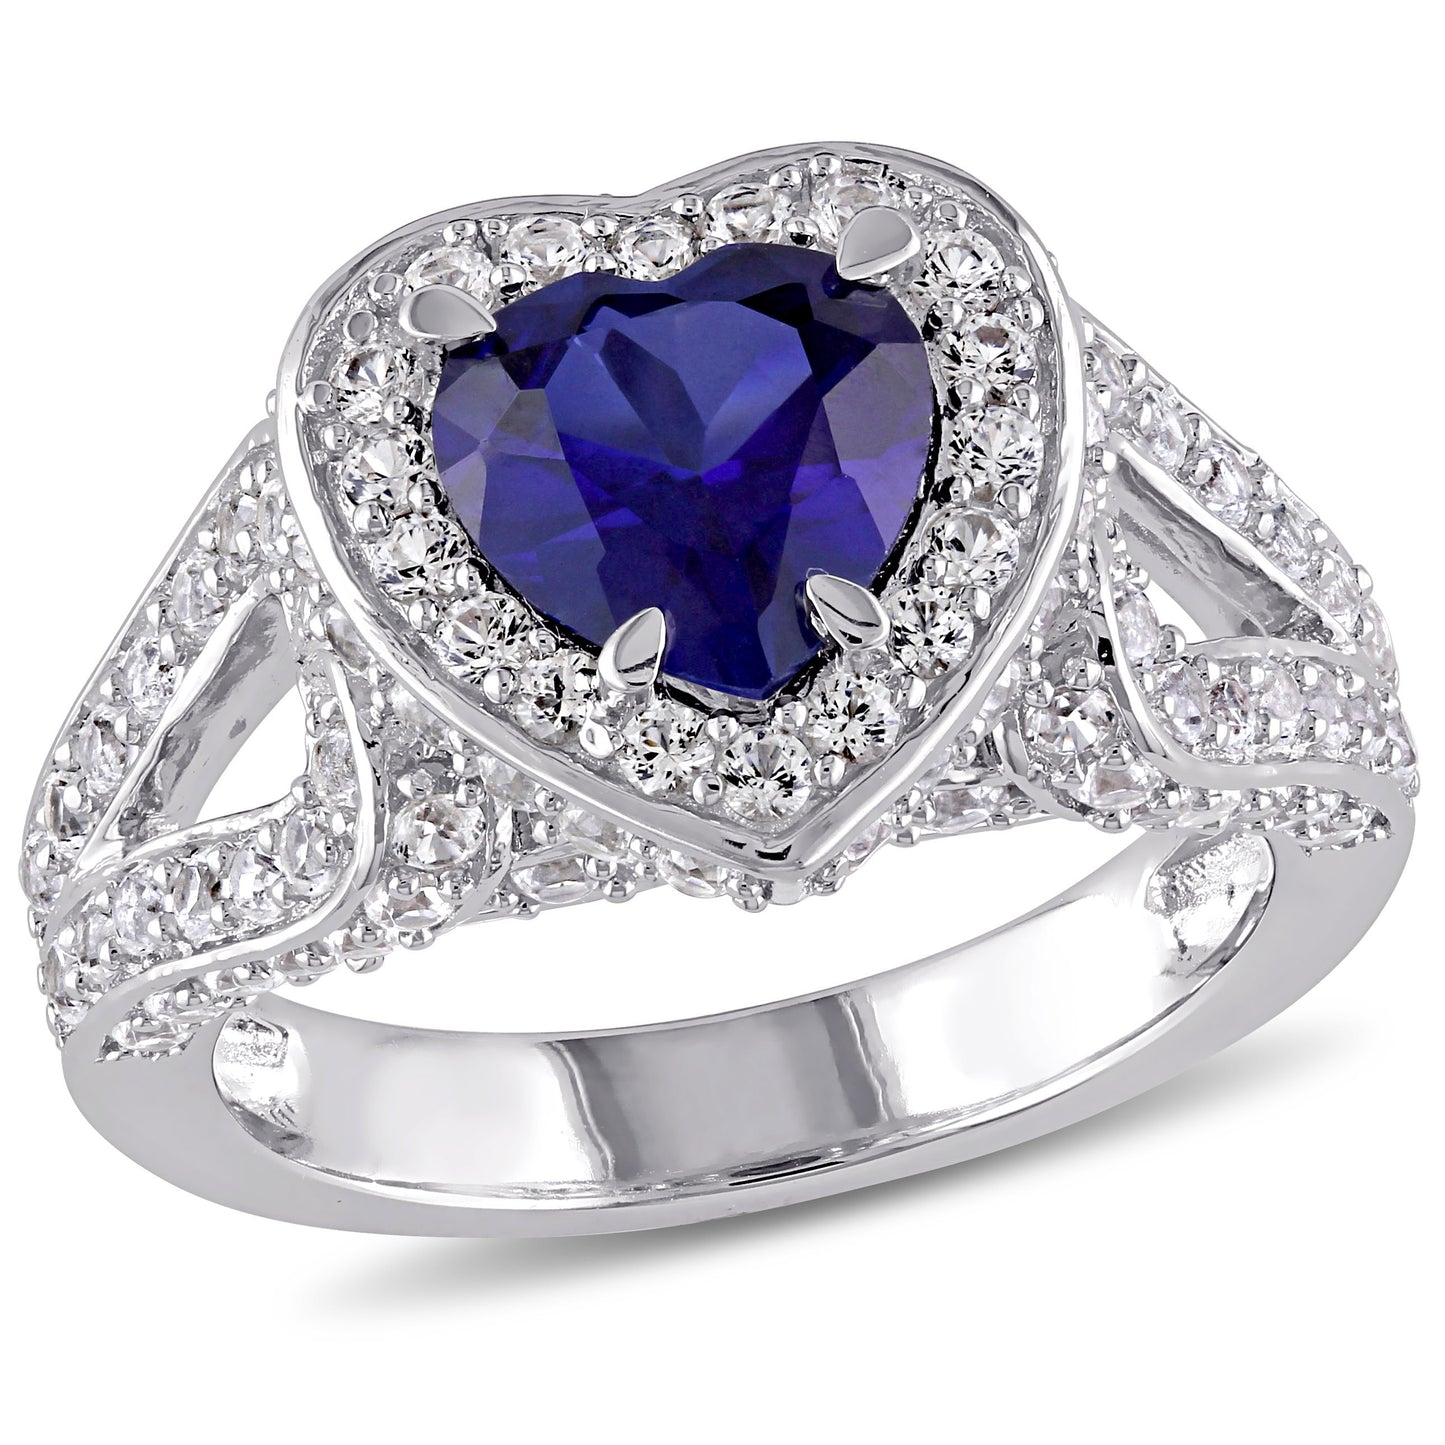 Sophia B 4 3/8ct Blue and White Sapphire Heart Ring in Sterling Silver